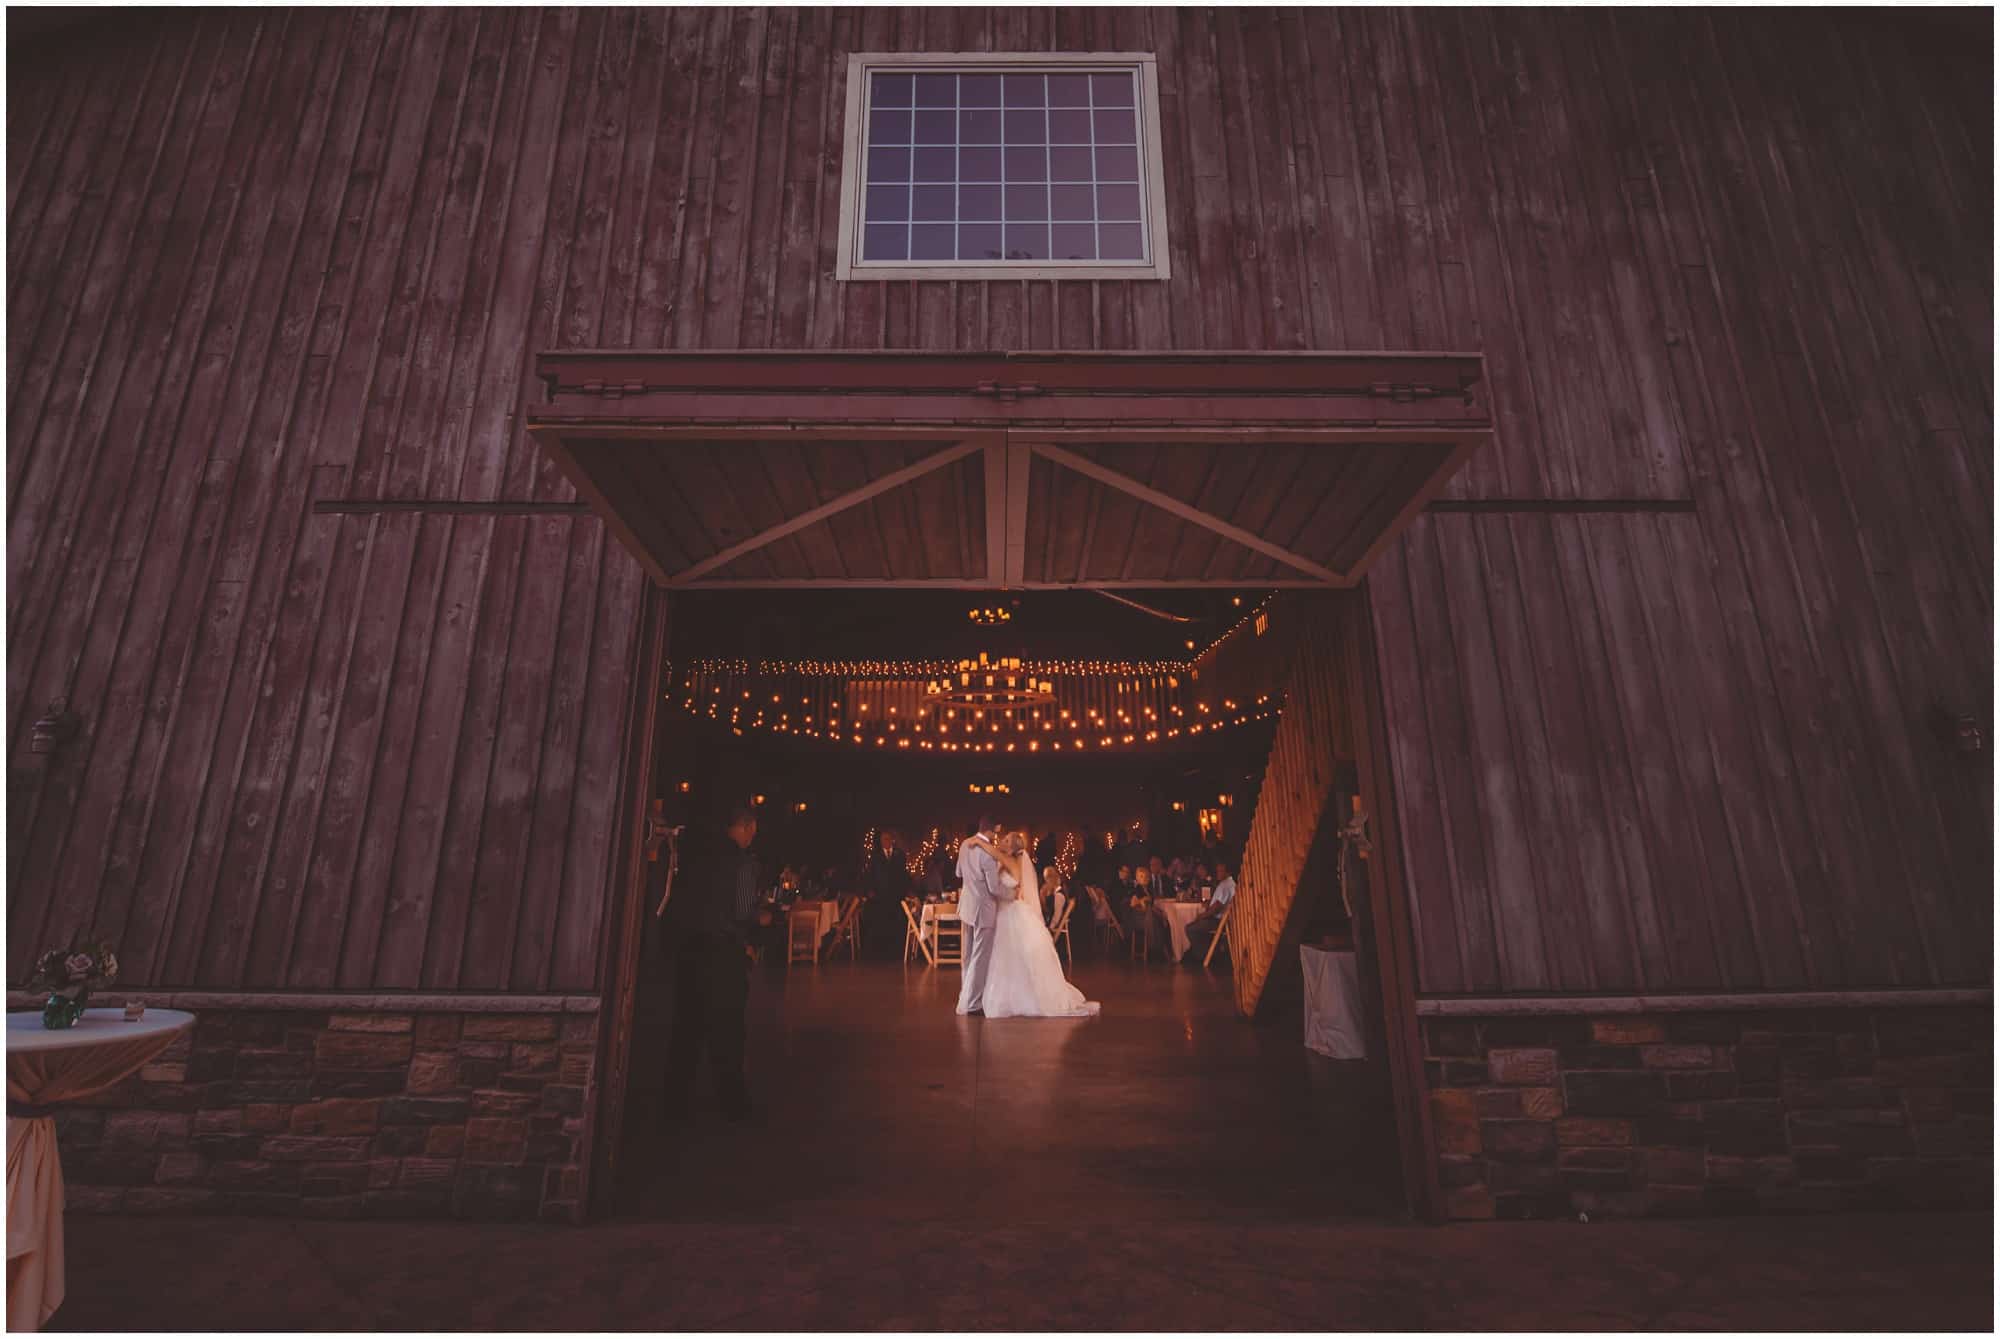 County Line Orchard Wedding Photographer bride and groom dancing together photographed from outside the barn doors, with the barn doors framing the couple dancing 